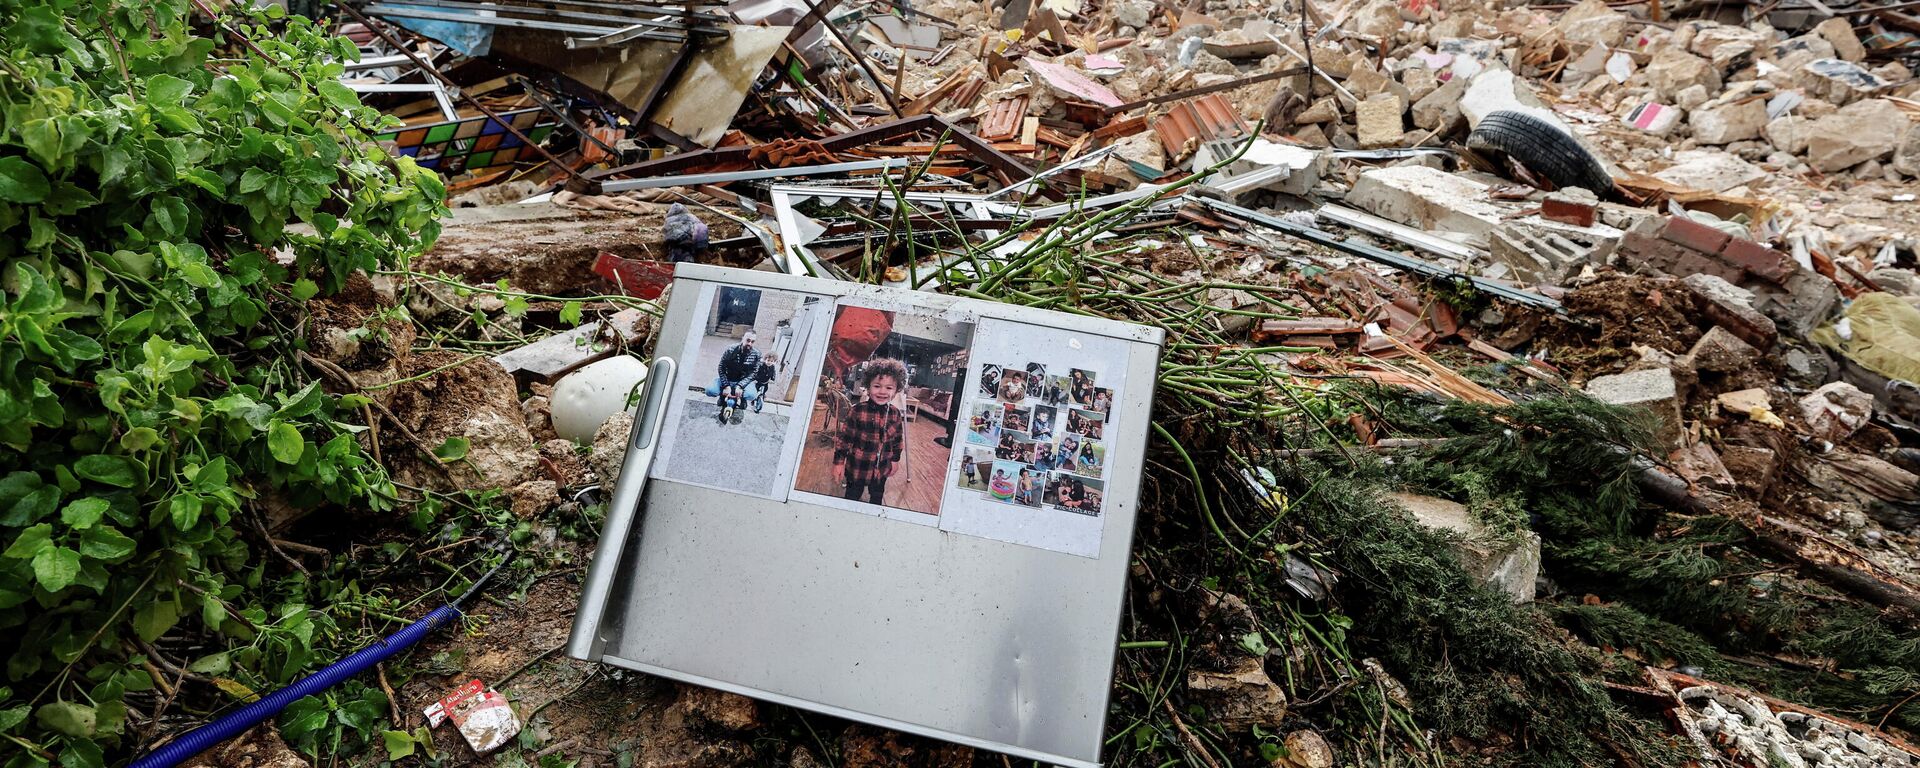 FILE PHOTO: Family photos are seen on the remains of a refrigerator at the site of a demolished house in the Sheikh Jarrah neighbourhood of East Jerusalem January 19, 2022. - Sputnik International, 1920, 20.01.2022